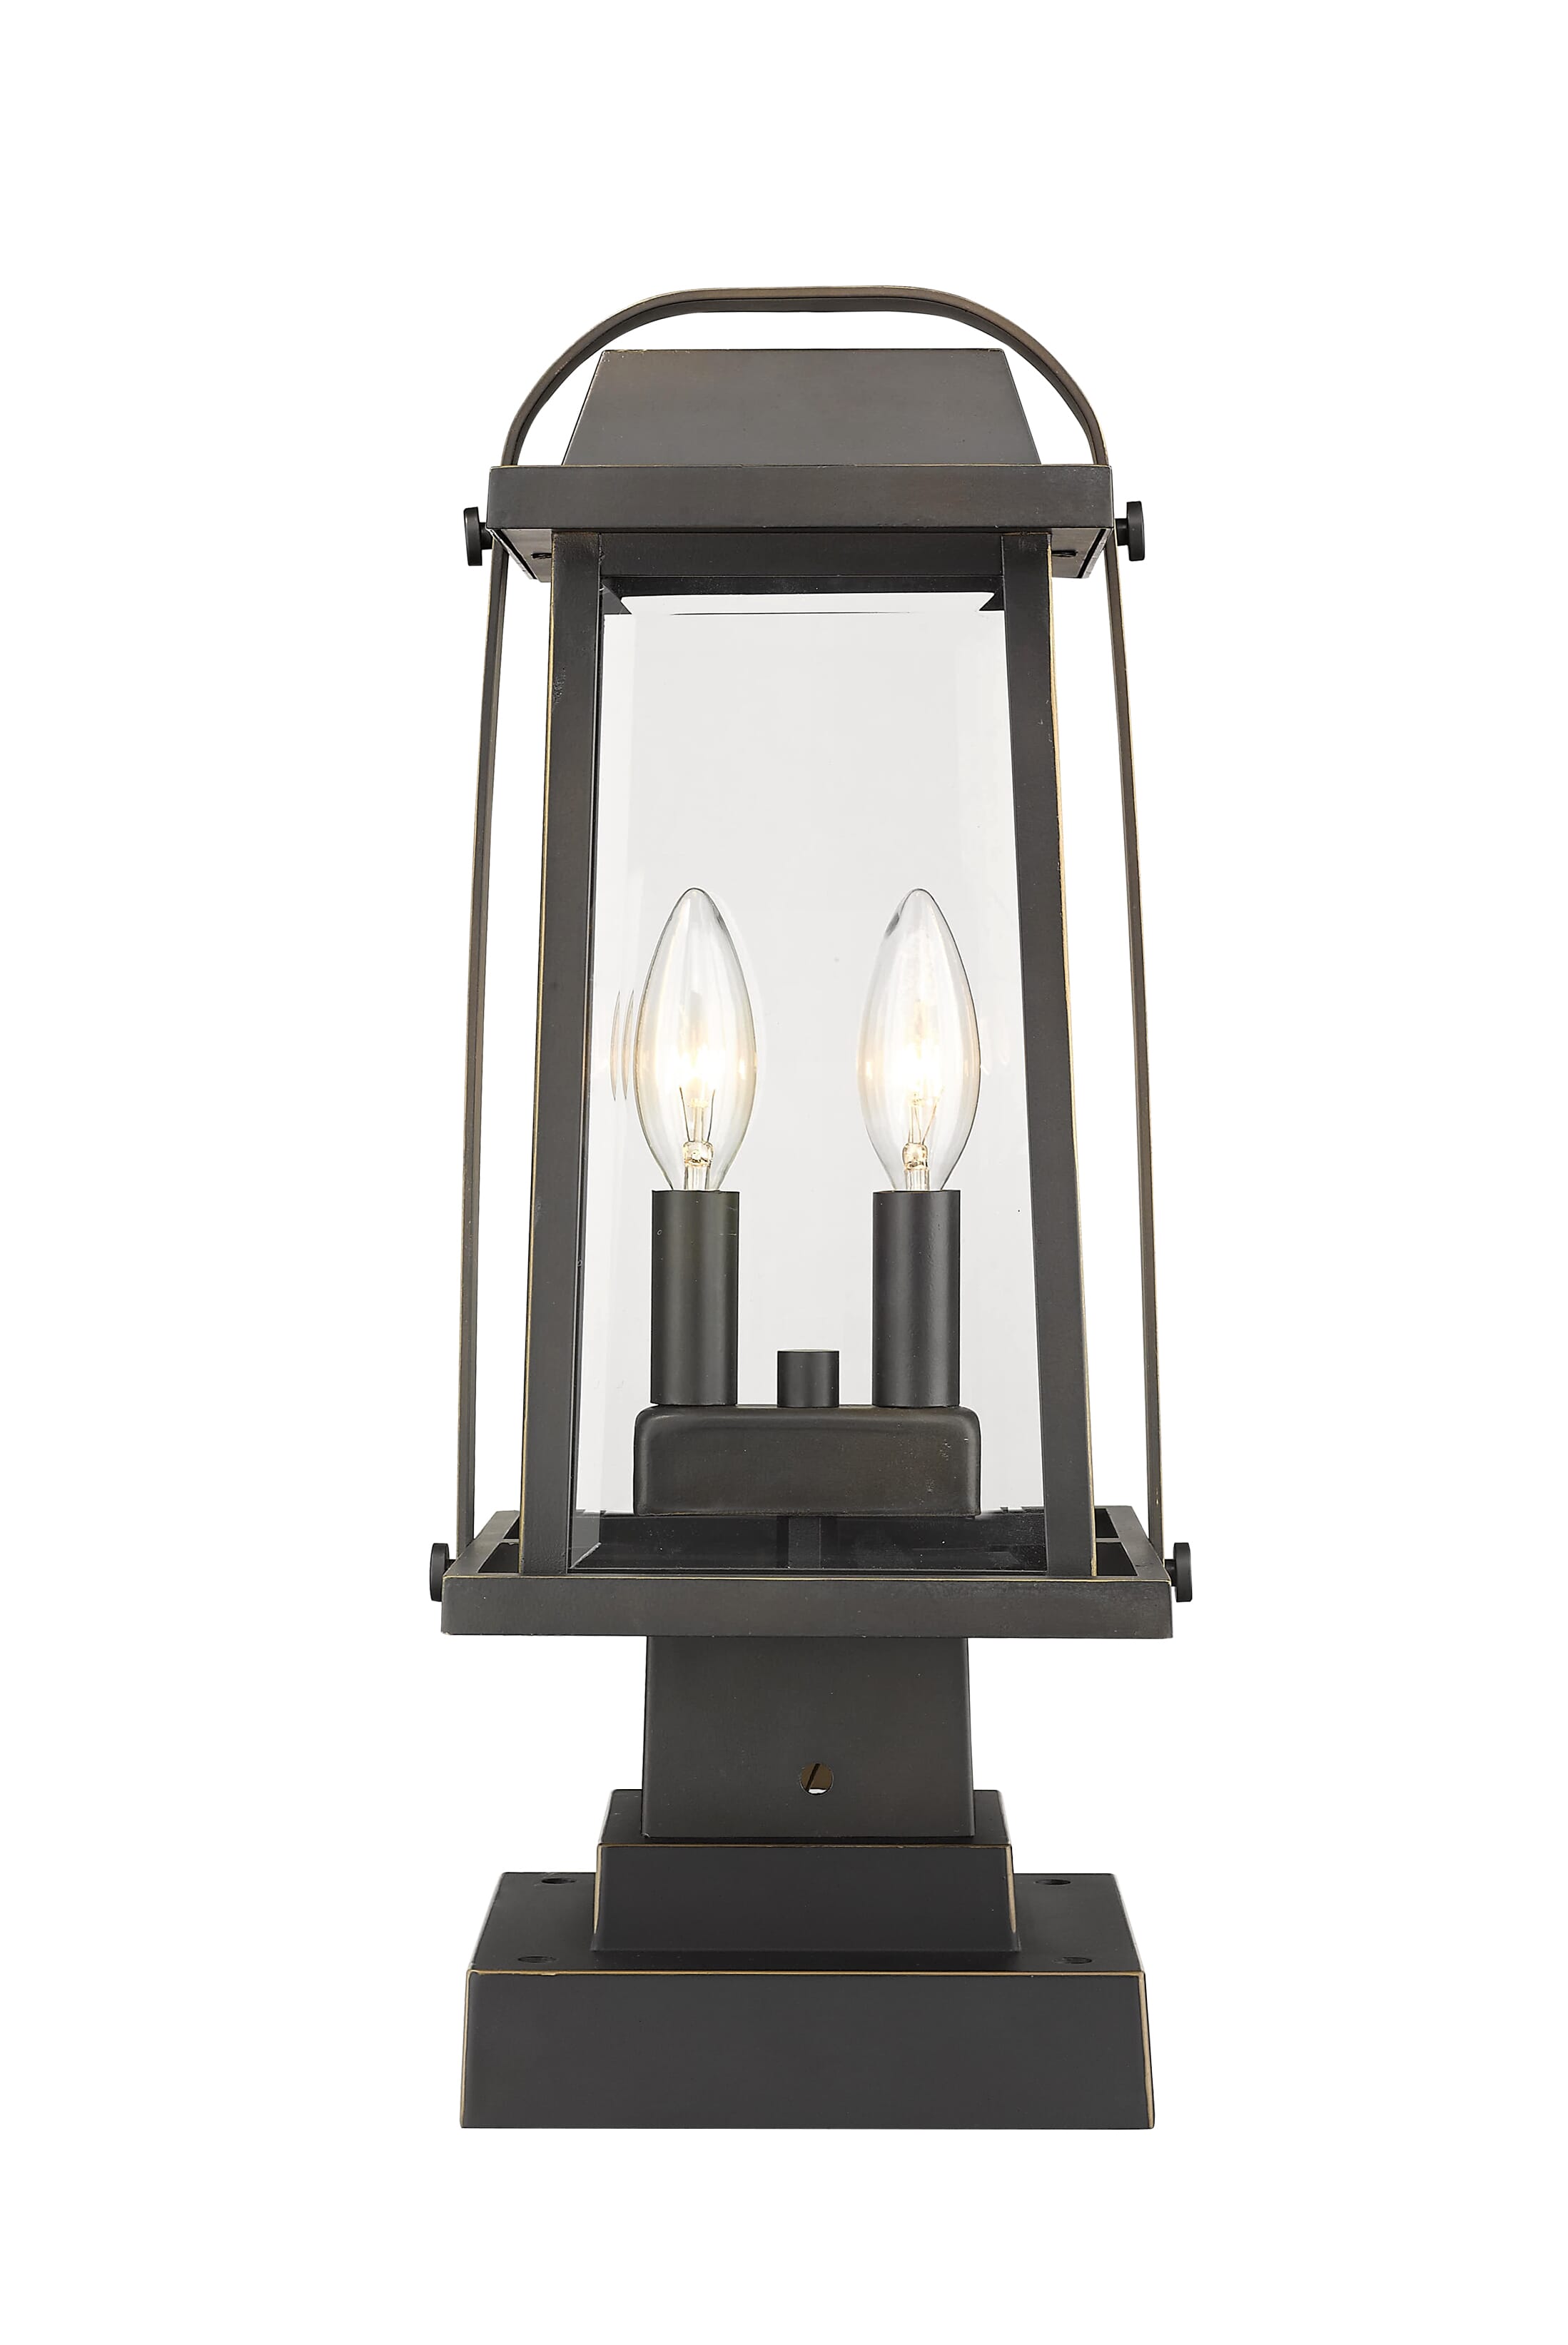 Millworks 2-Light Outdoor Pier Mounted Fixture Light In Oil Rubbed Bronze